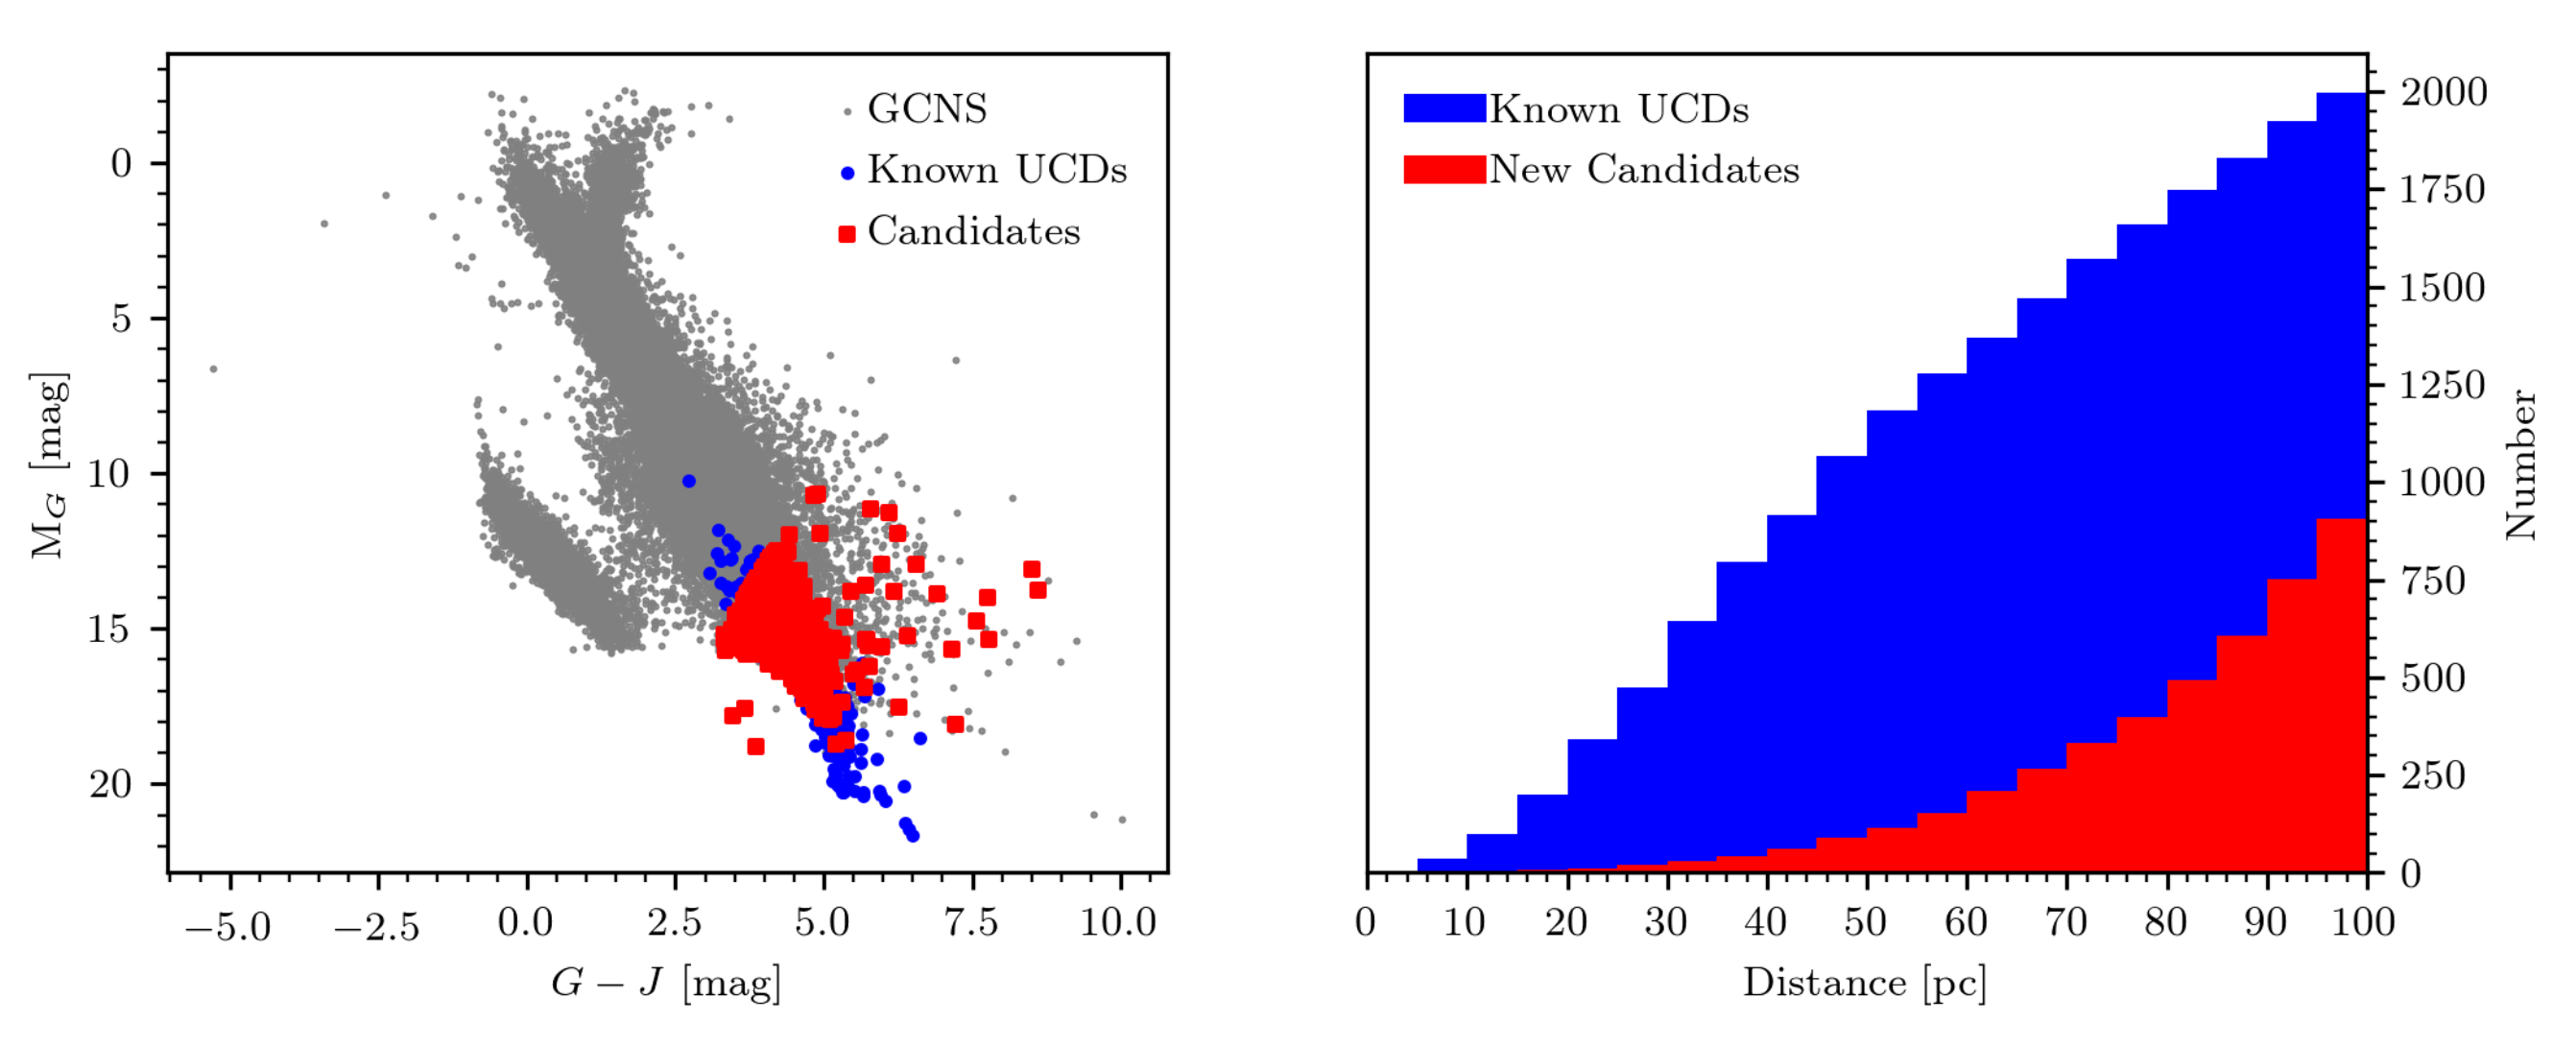 The new ultra-cool dwarfs found in the GCNS using Gaia EDR3